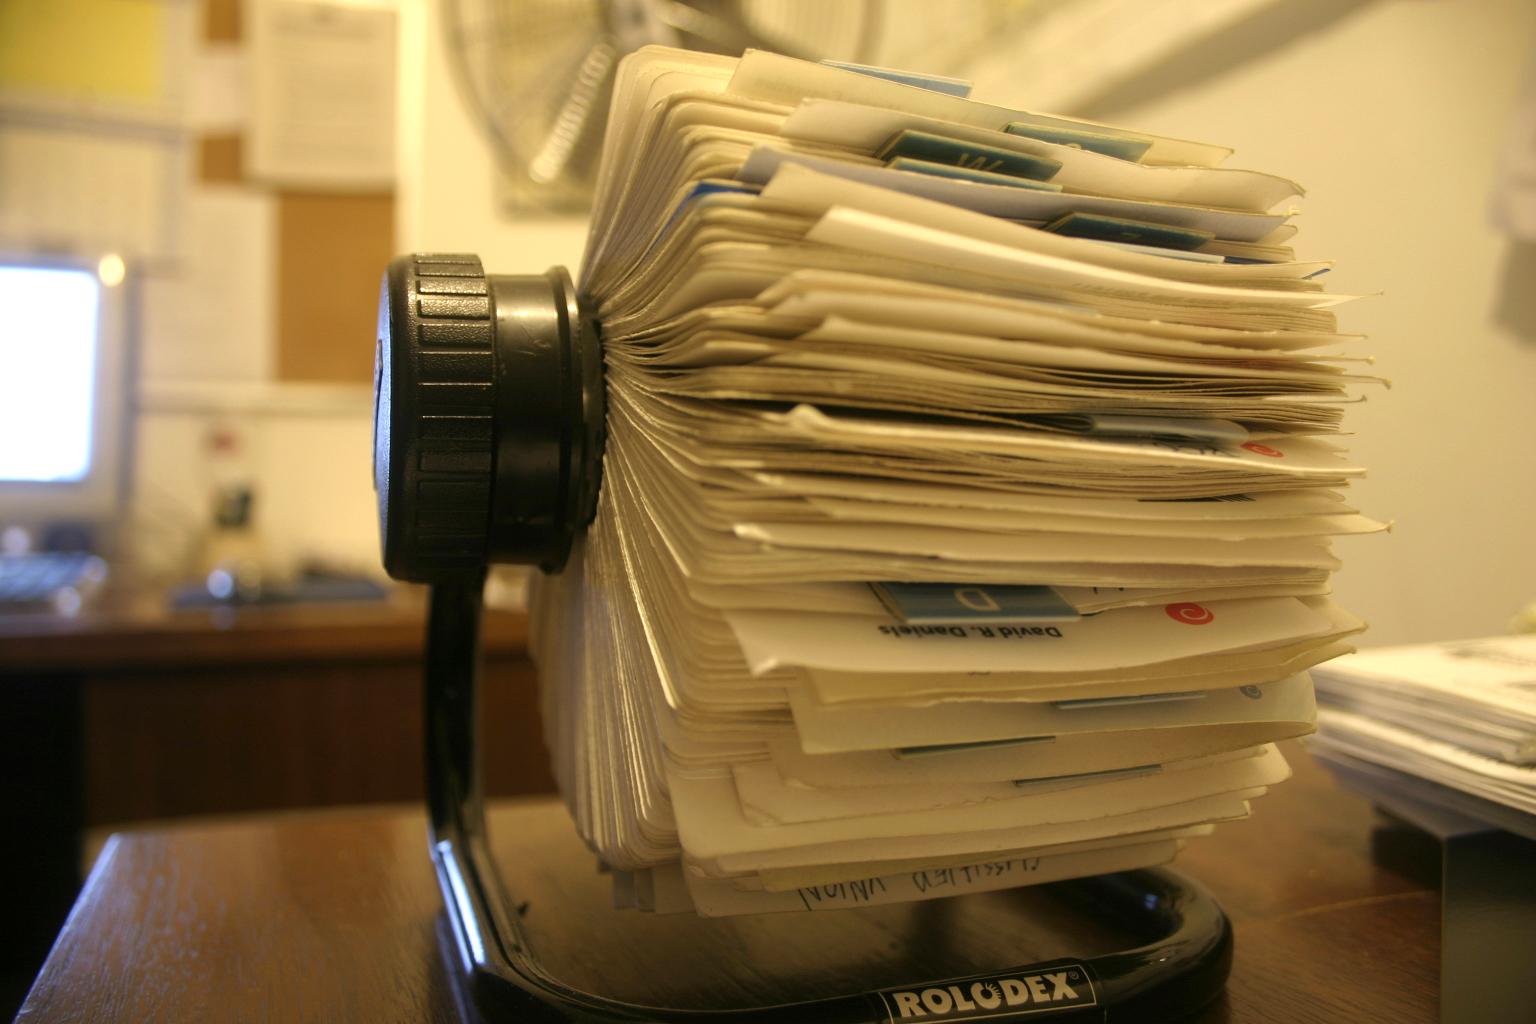 The benefits of a CRM system go far beyond that of a digital Rolodex.